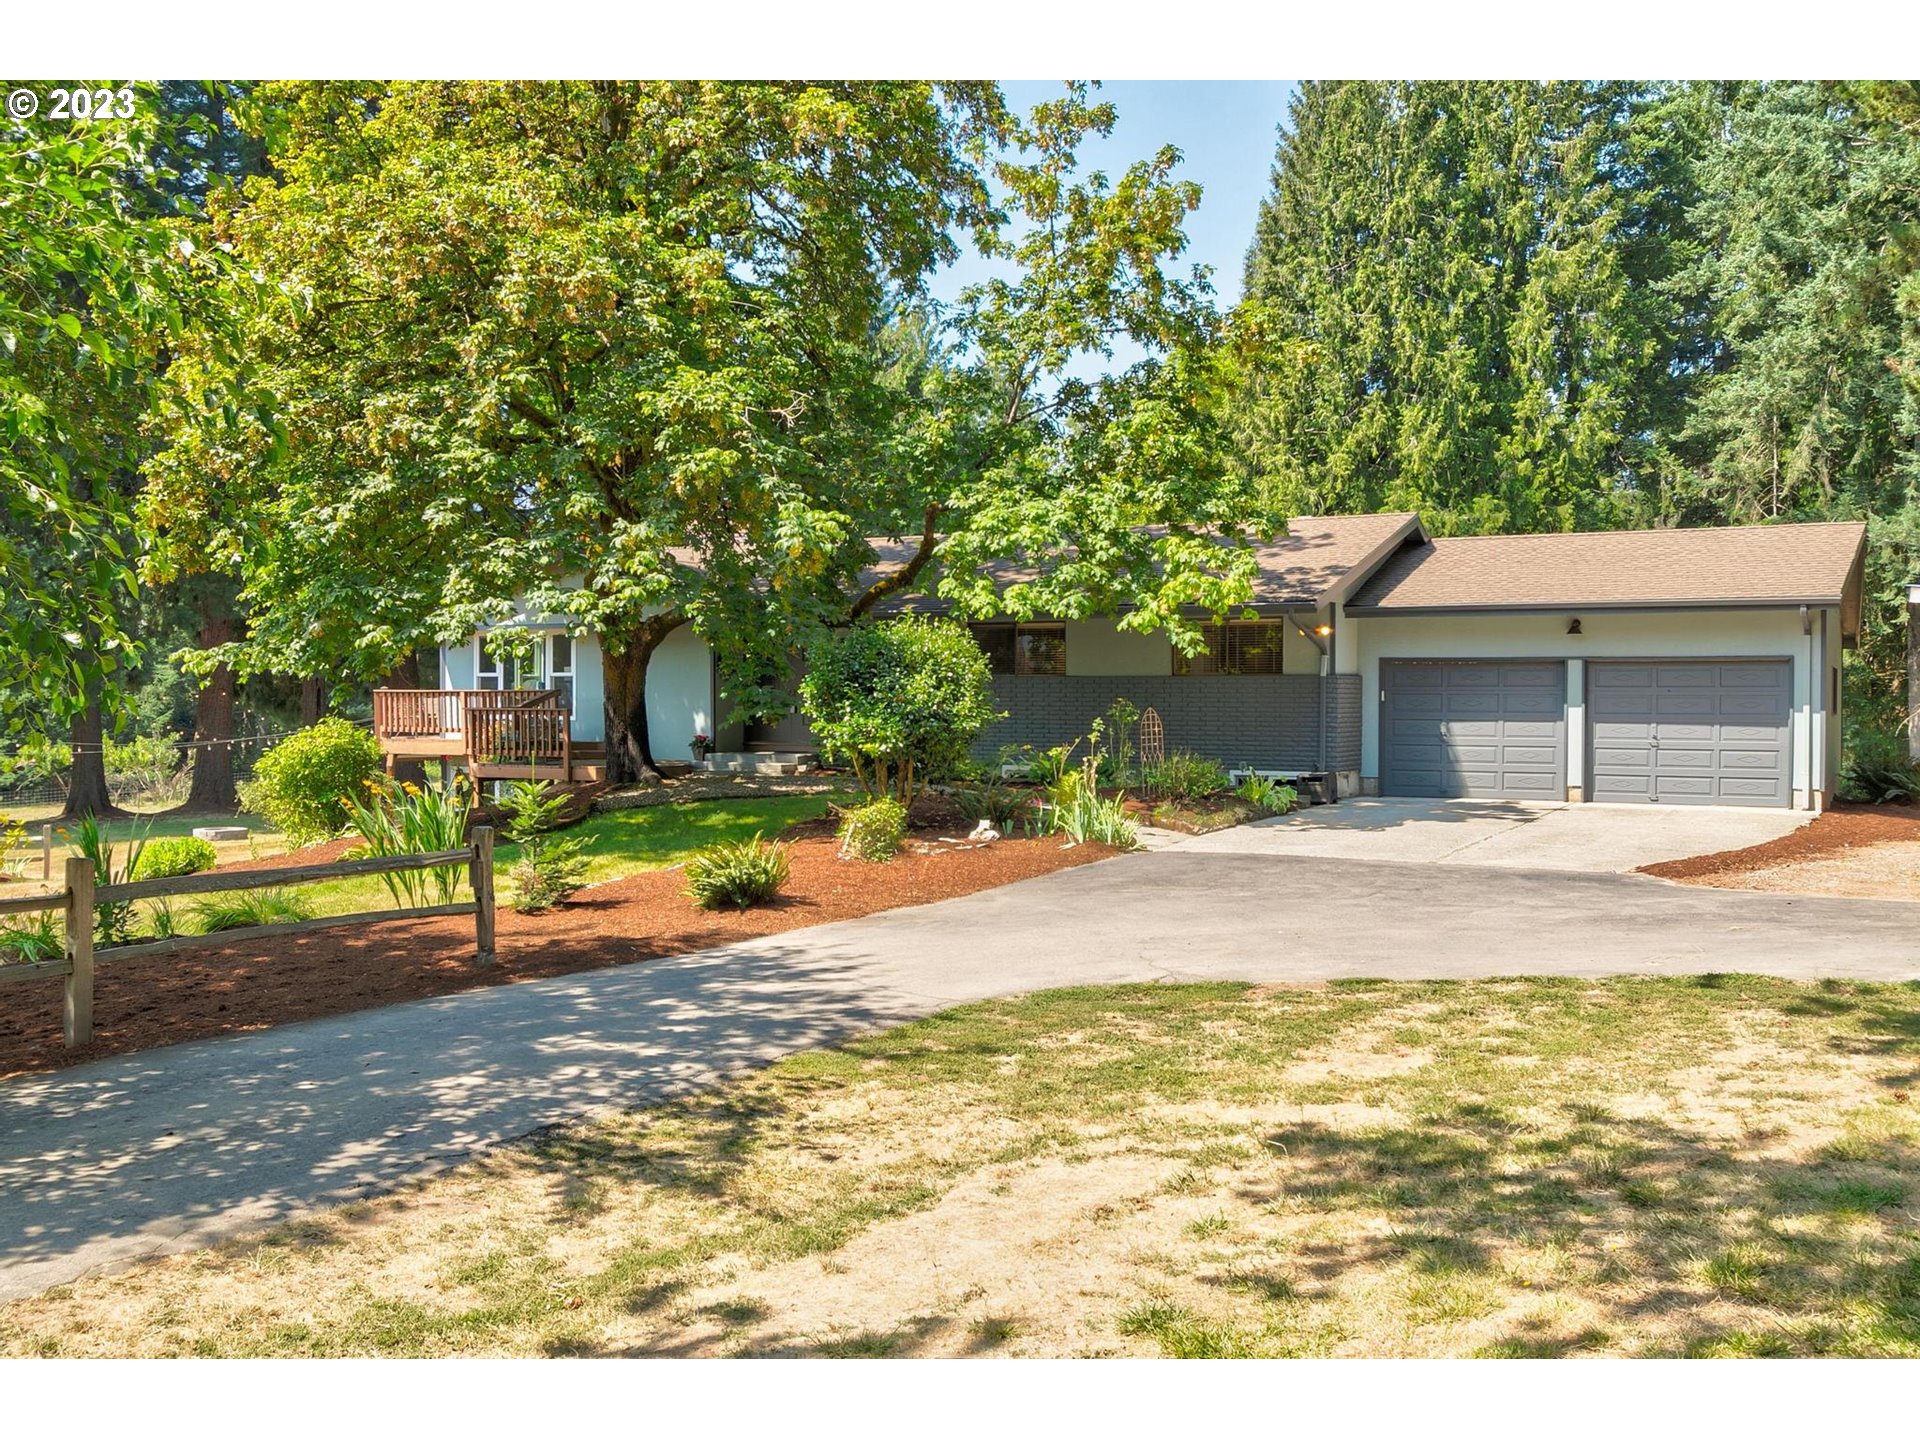 20721 S MAY RD, Oregon City, OR 